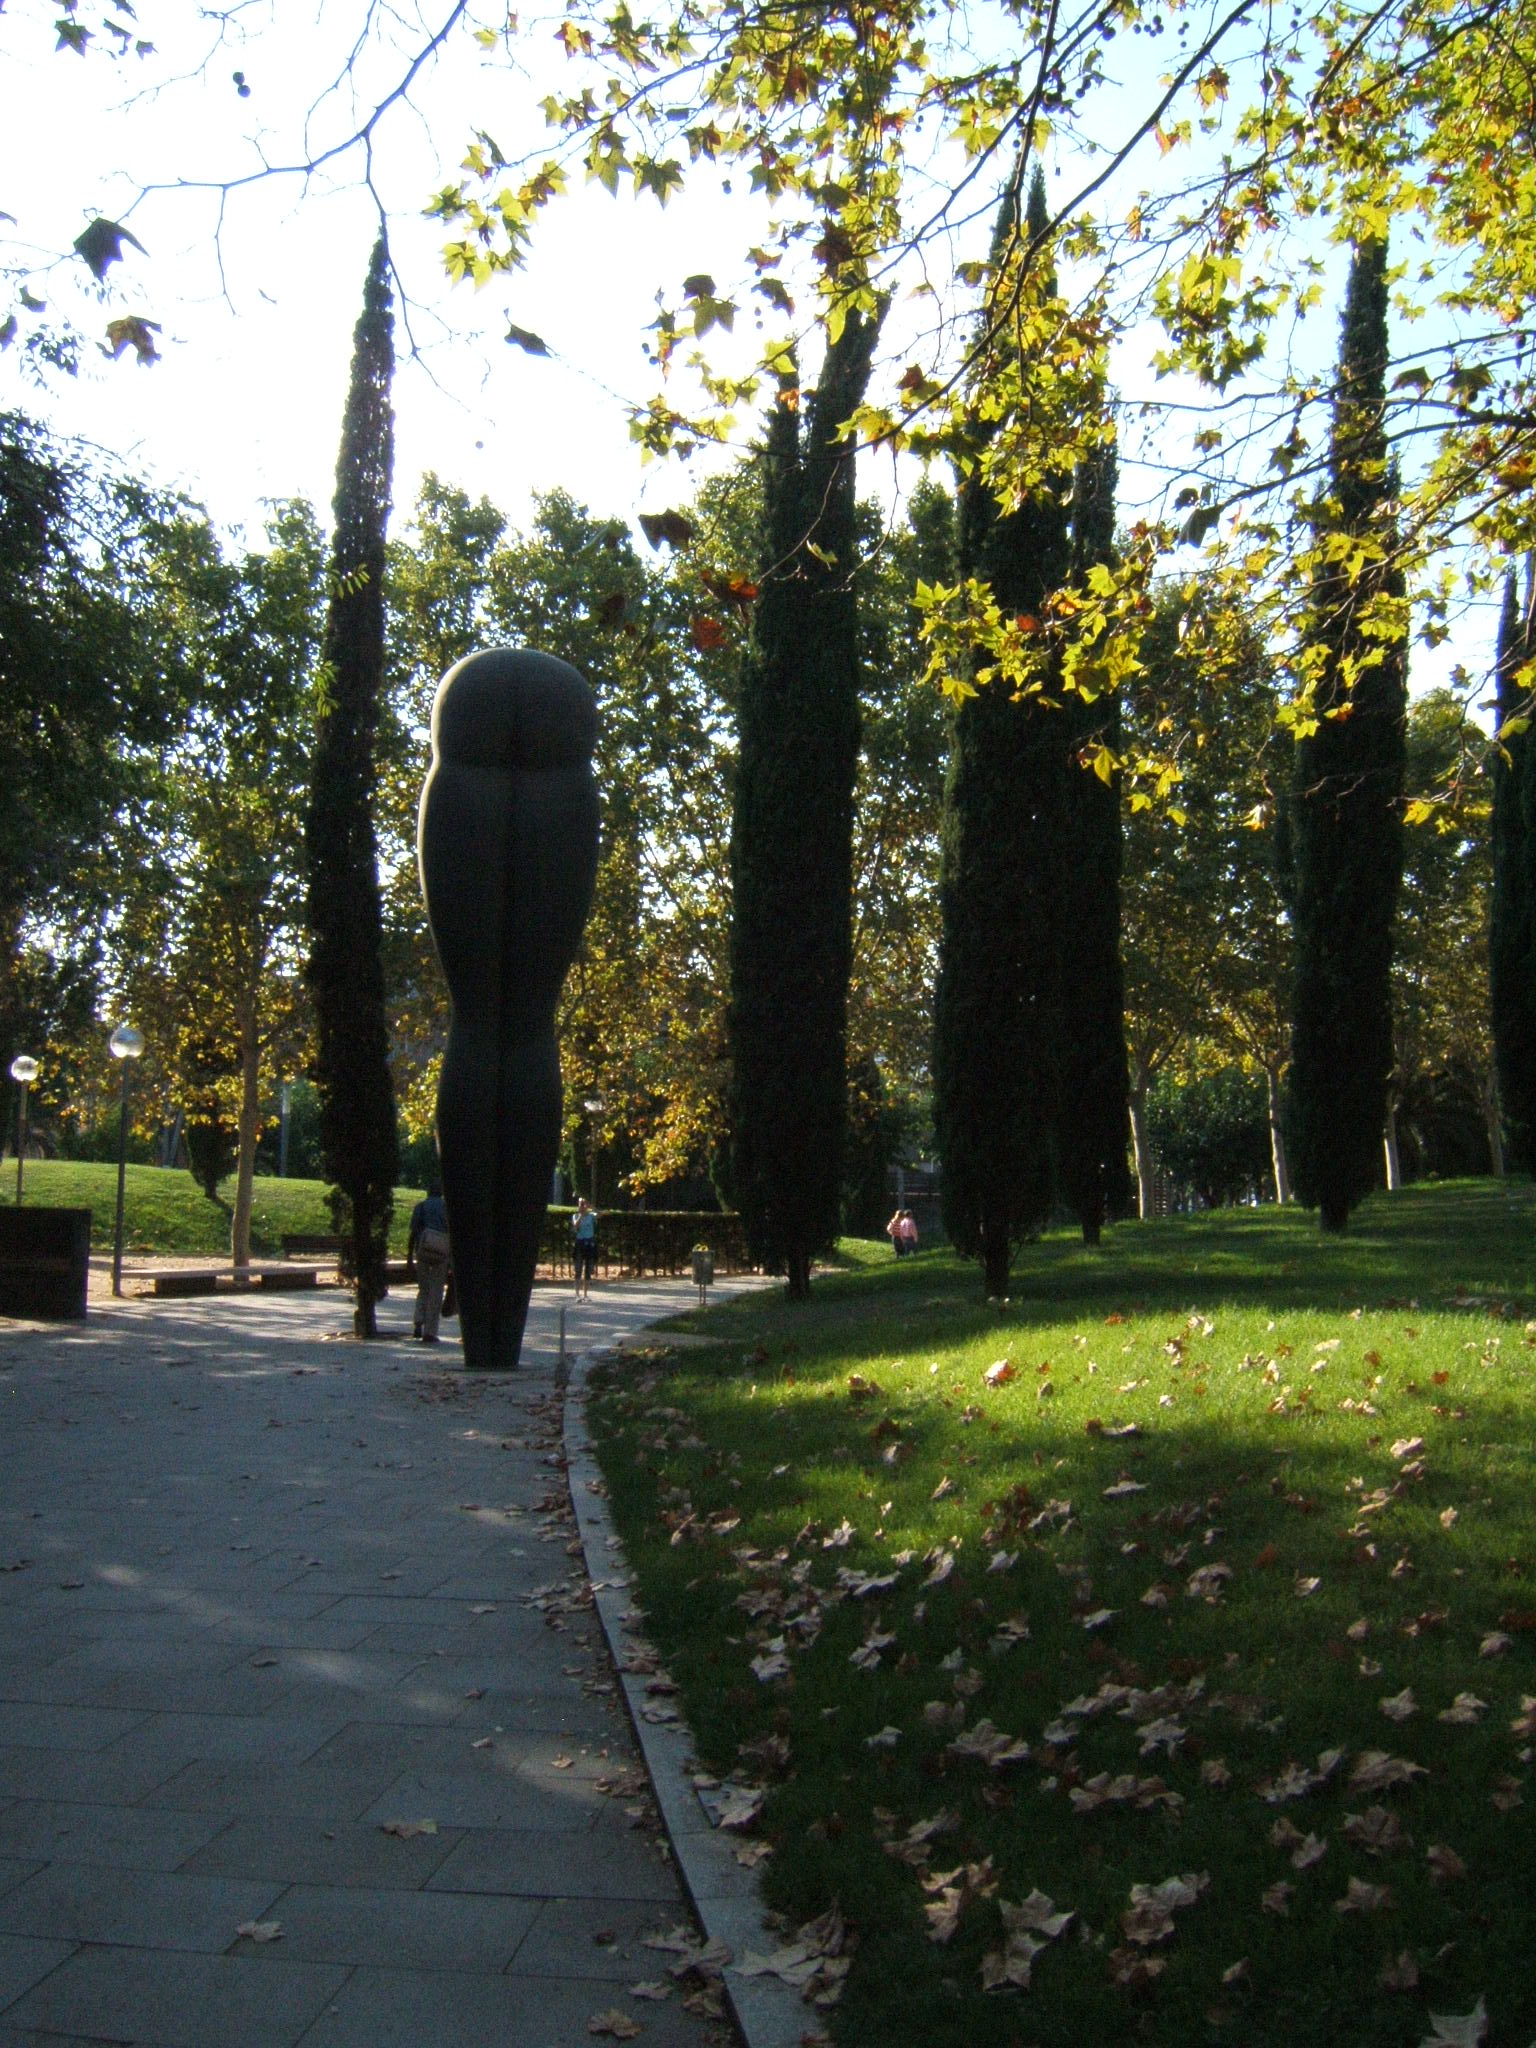 a statue in the park is on the path